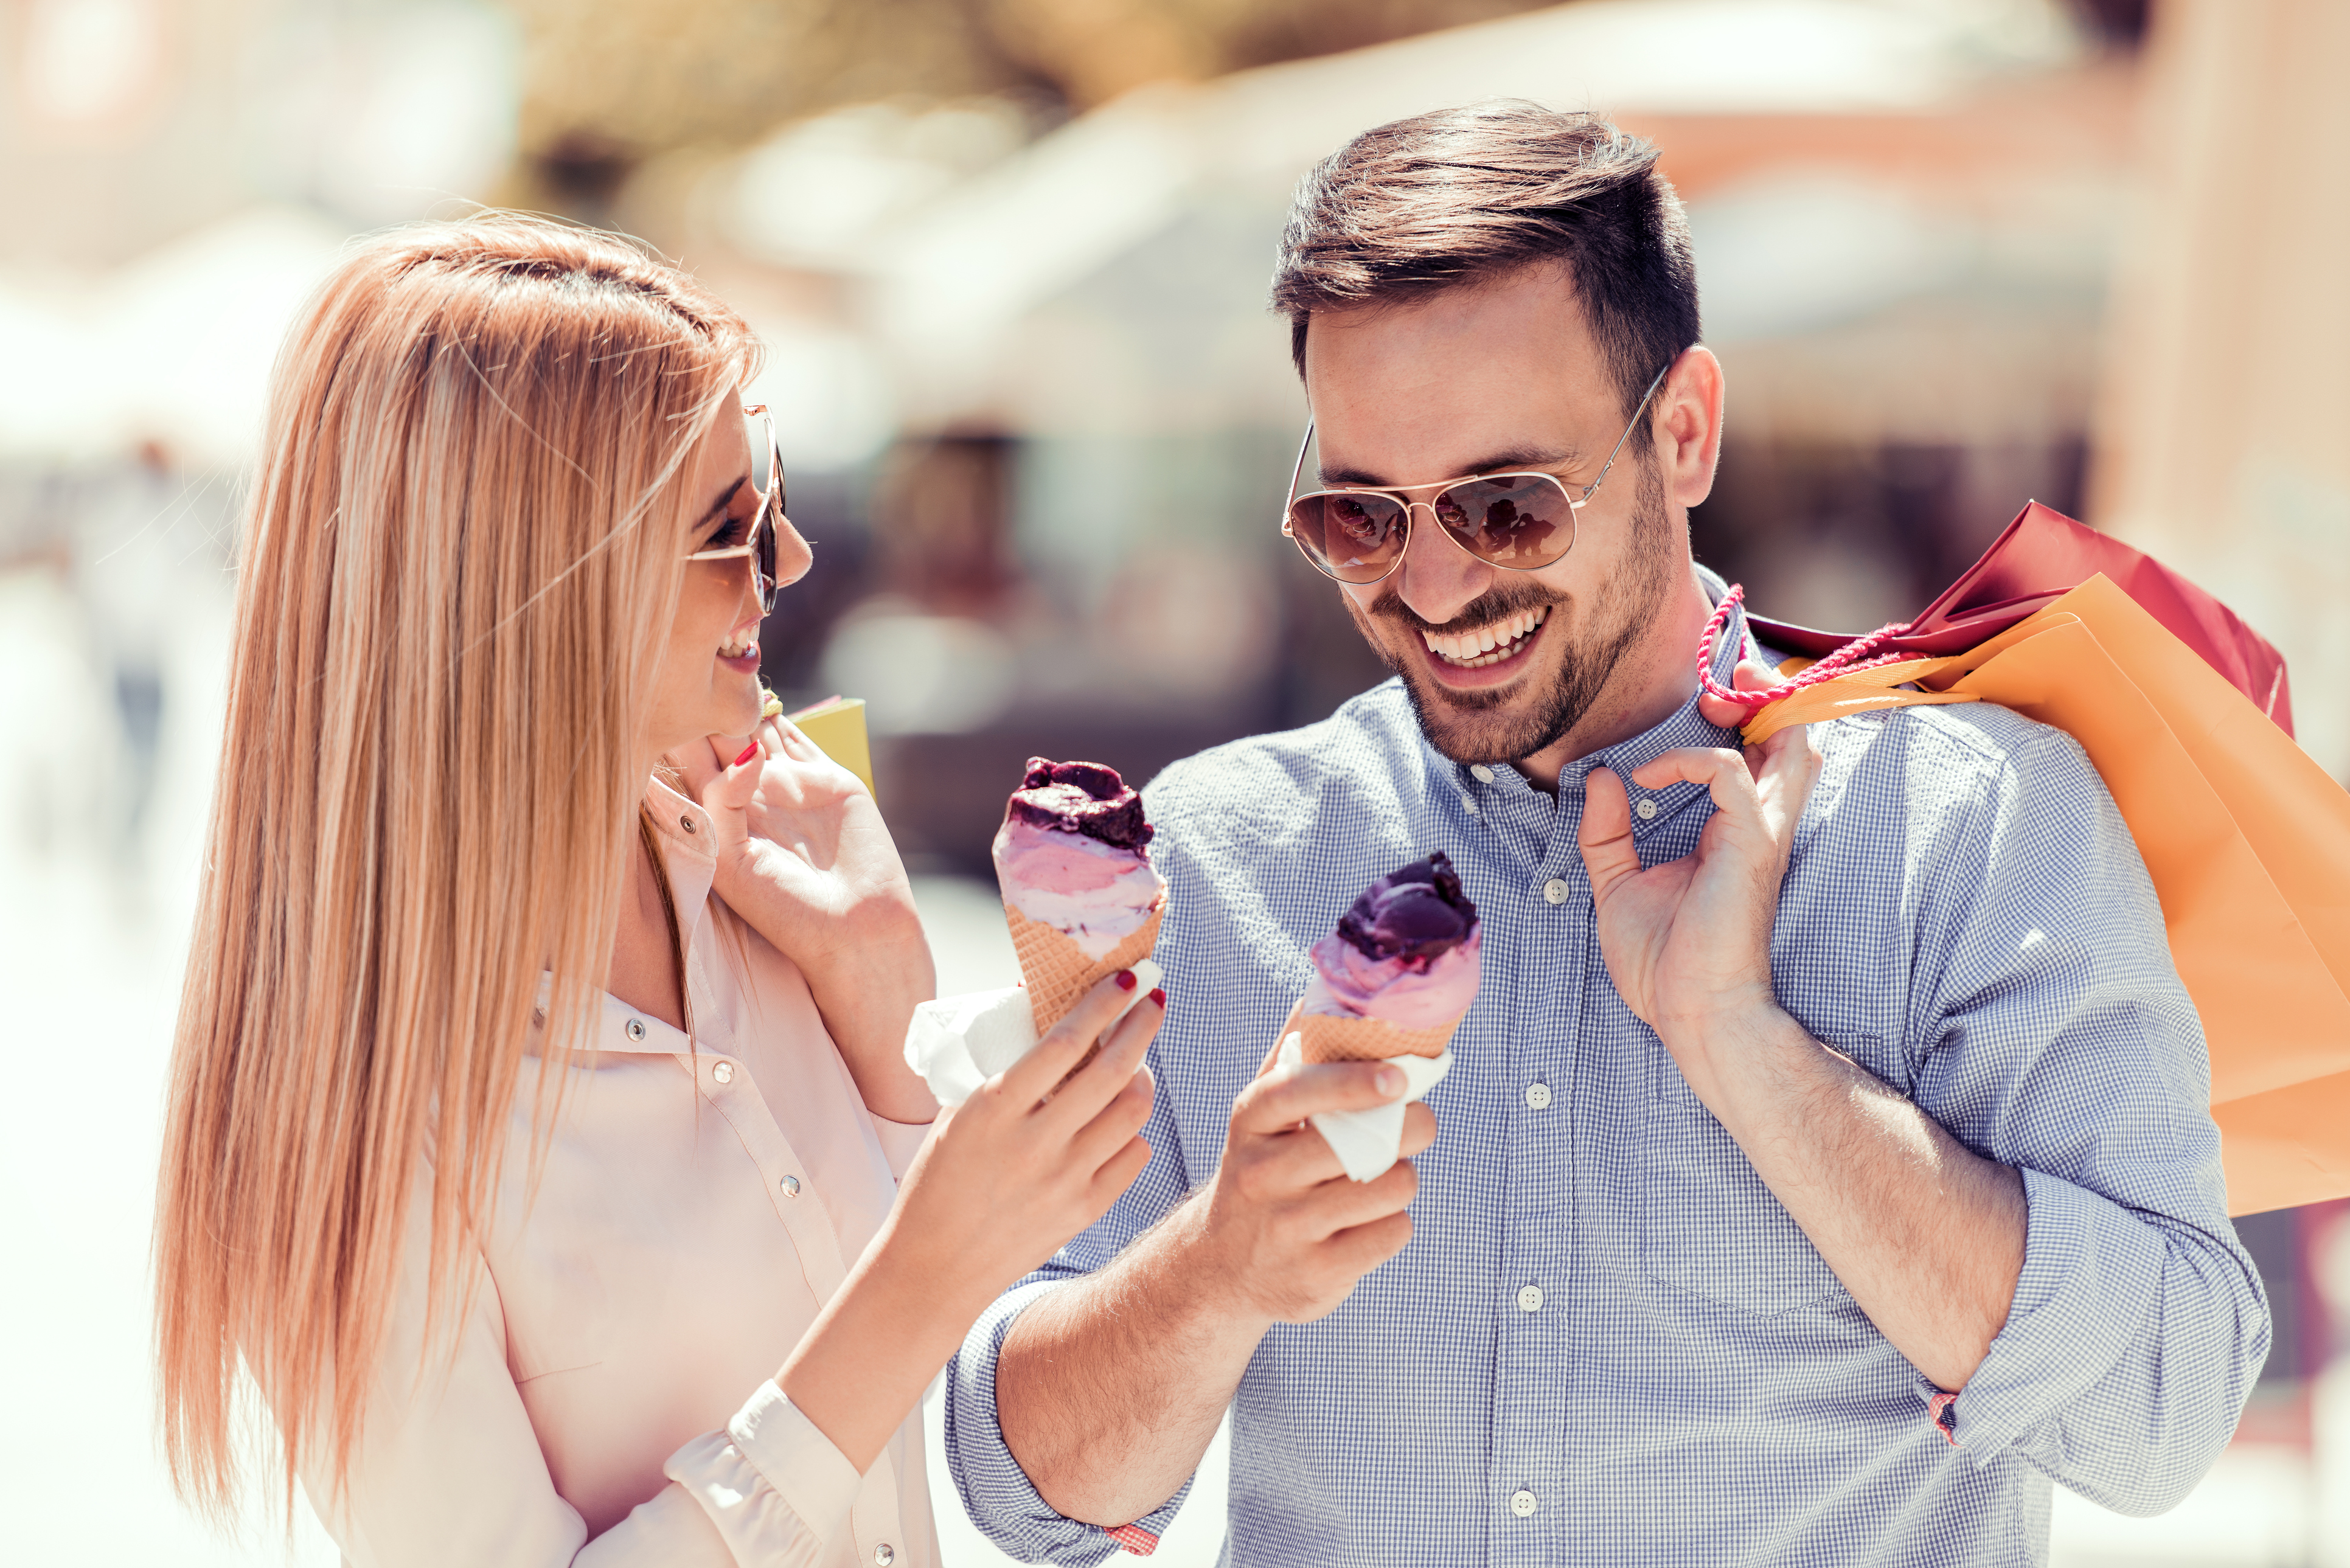 Couple wearing sunglasses, eating ice cream and holding shopping bags.